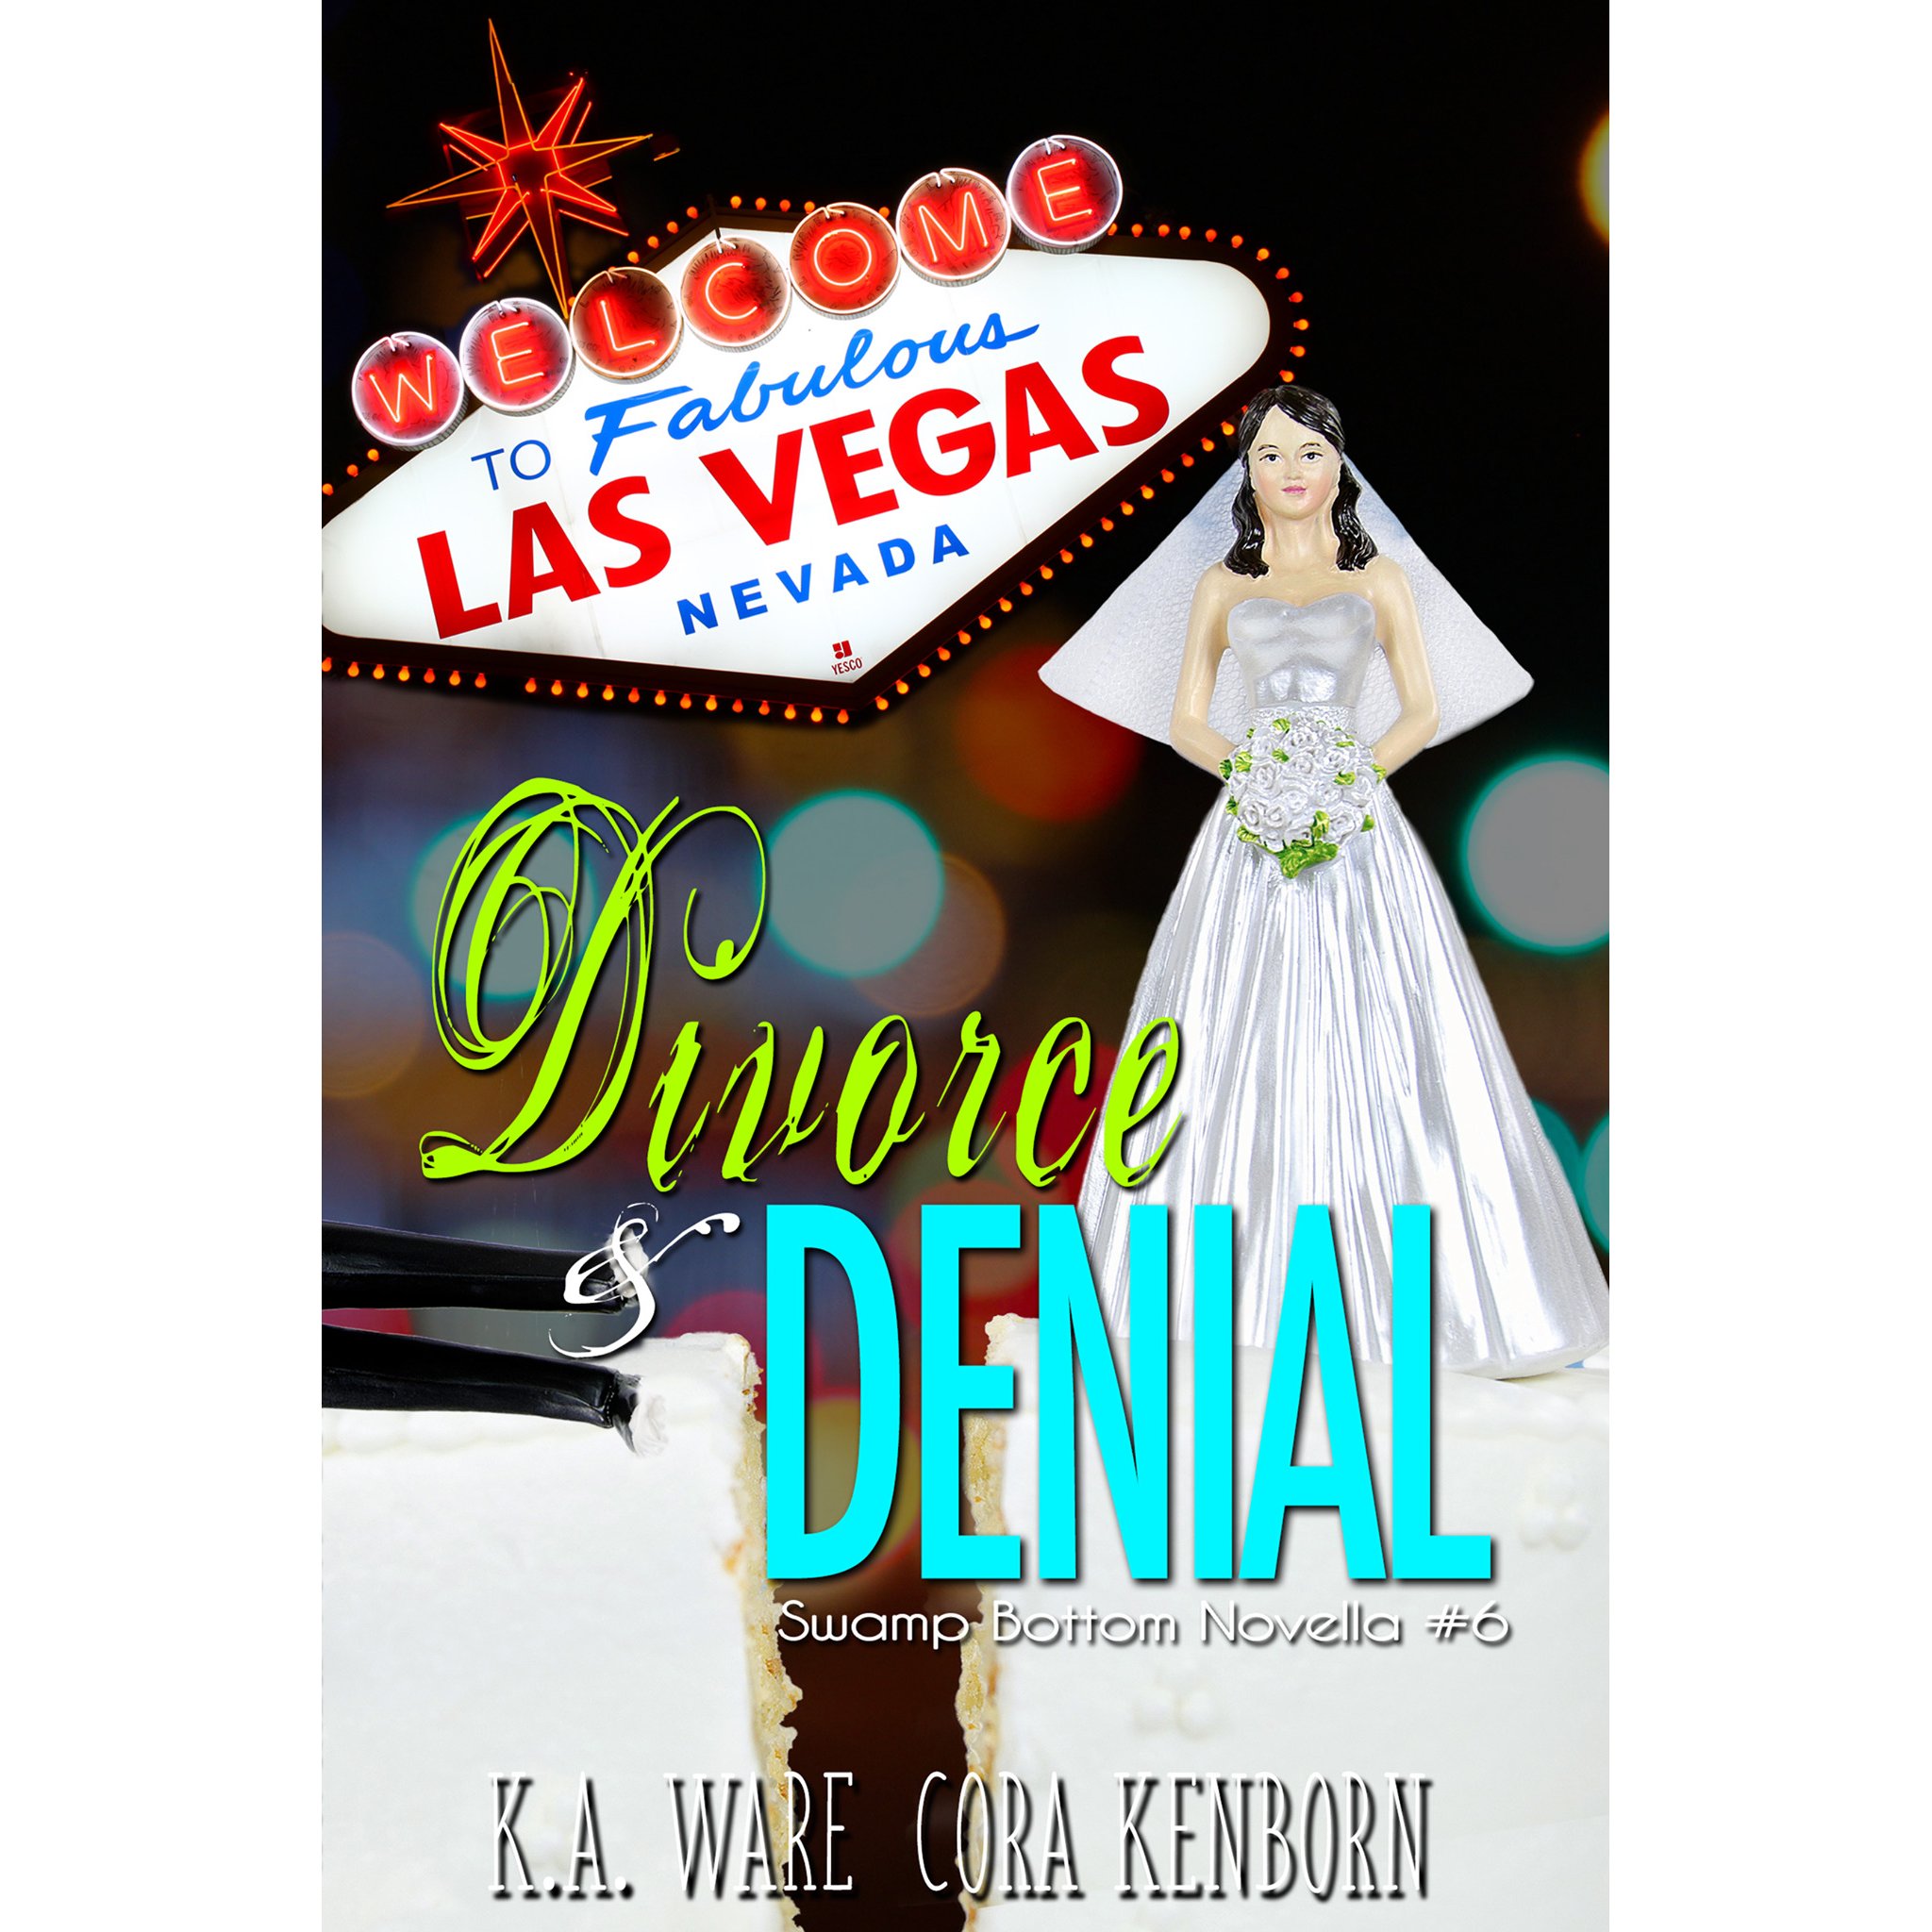 Divorce and Denial (Swamp Bottom #6) by K.A. Ware